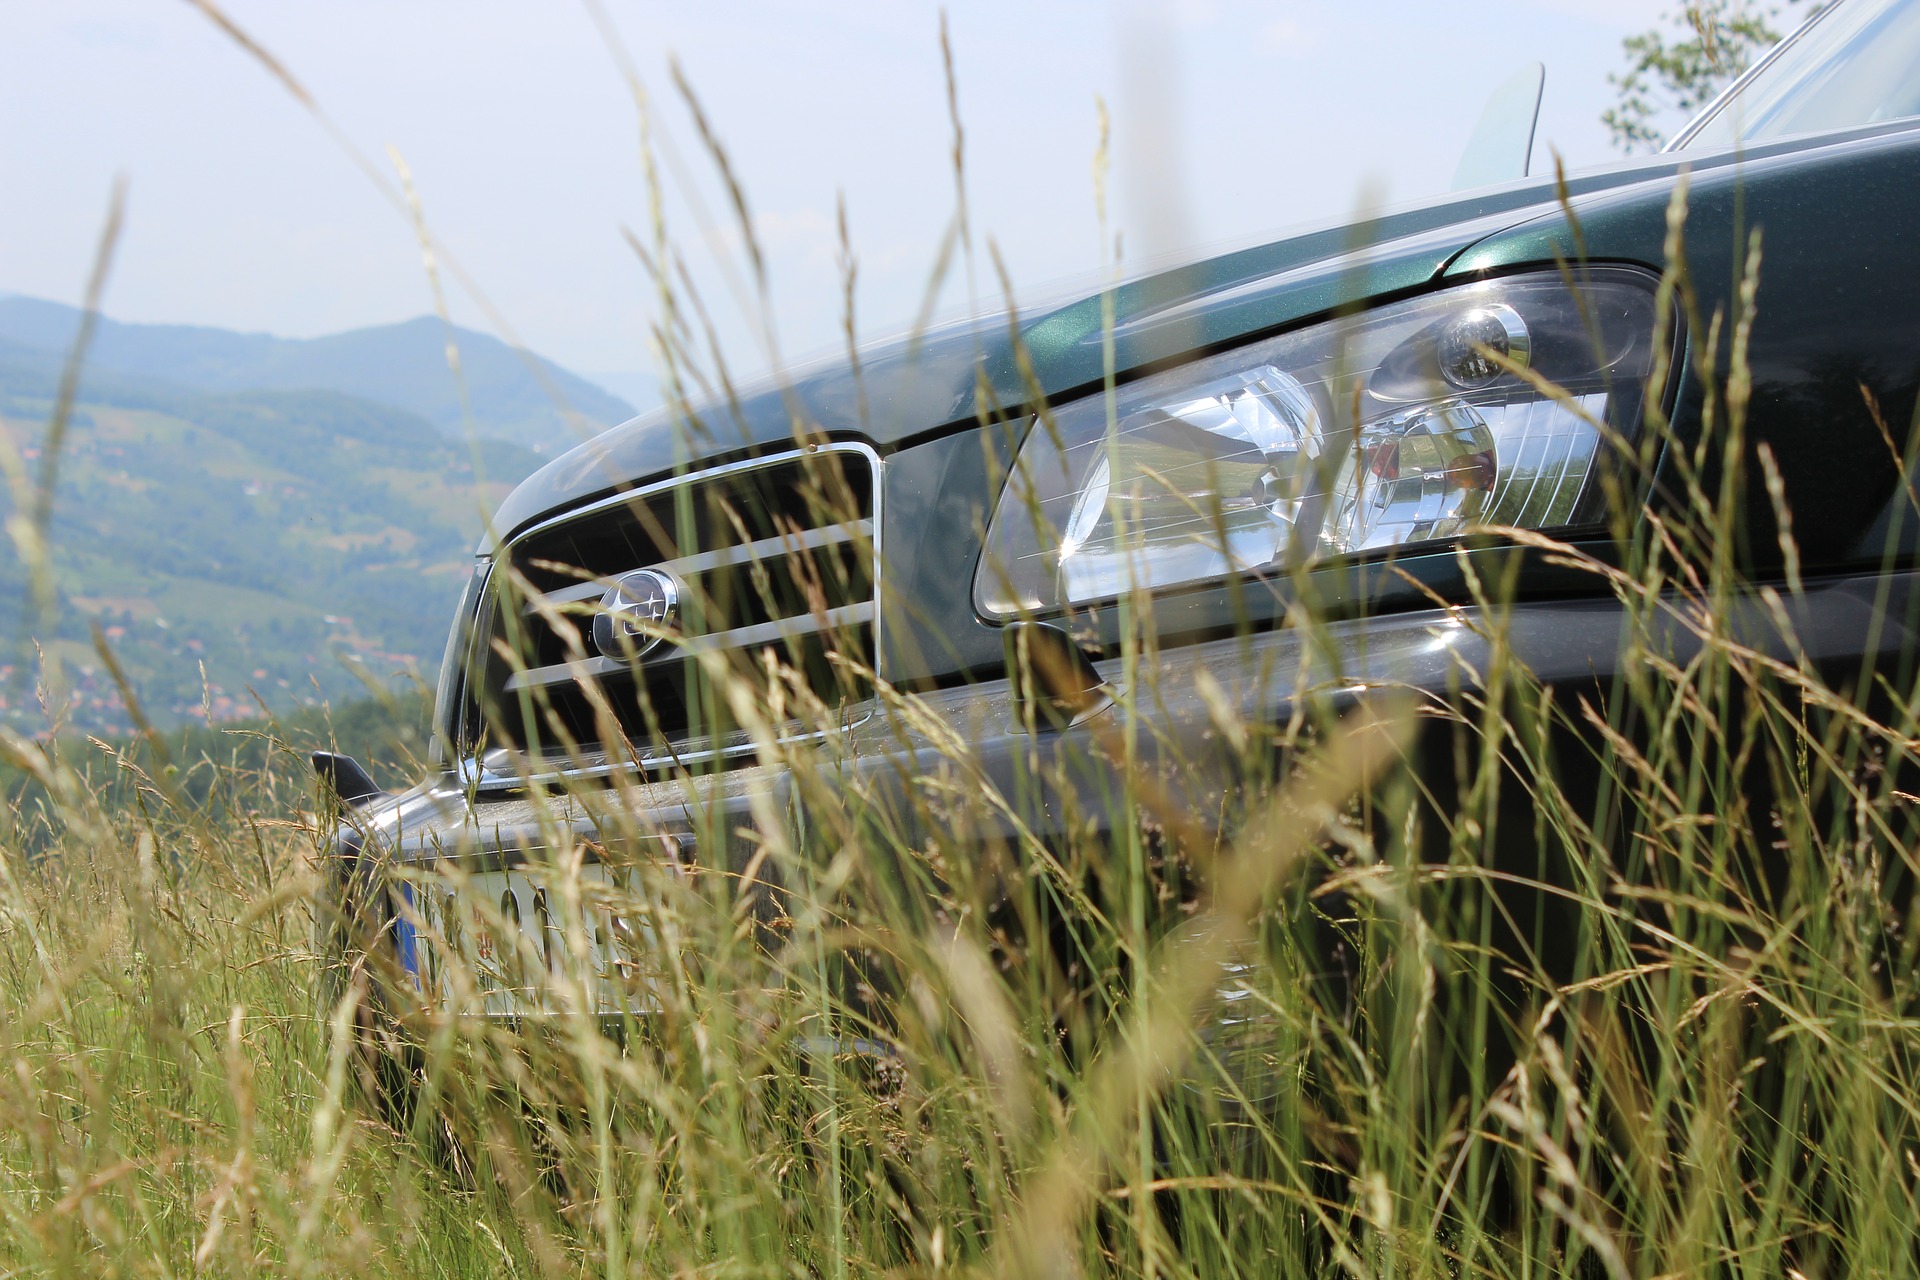 Photo of Subaru Forester in tall grass